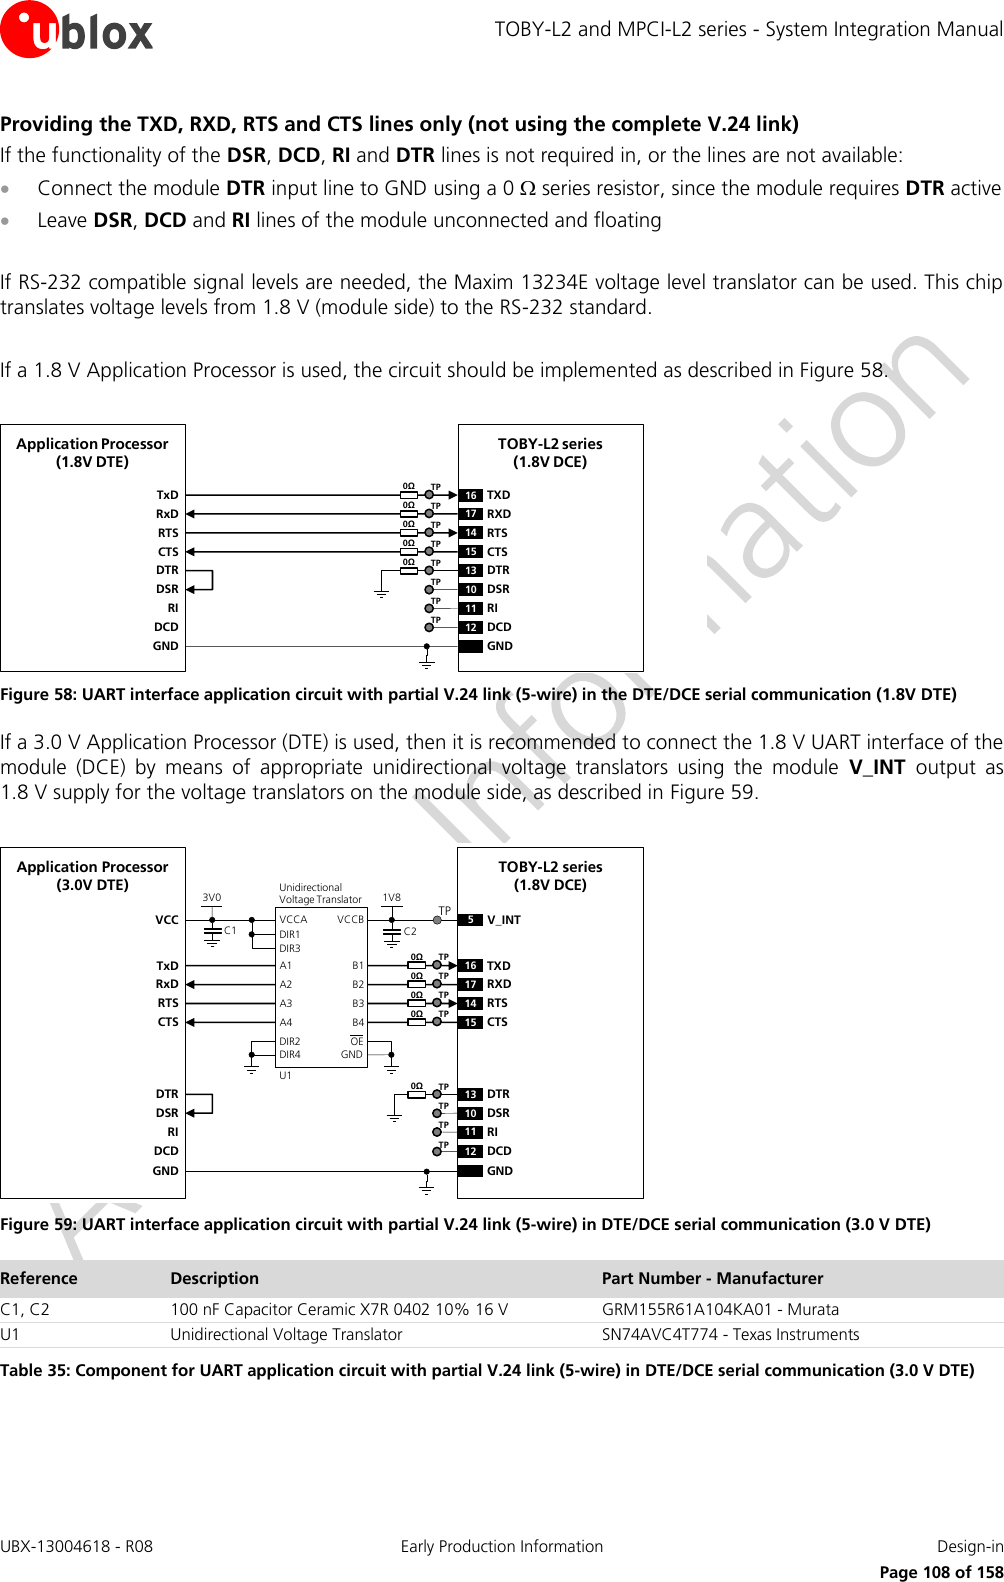 TOBY-L2 and MPCI-L2 series - System Integration Manual UBX-13004618 - R08  Early Production Information  Design-in     Page 108 of 158 Providing the TXD, RXD, RTS and CTS lines only (not using the complete V.24 link) If the functionality of the DSR, DCD, RI and DTR lines is not required in, or the lines are not available:  Connect the module DTR input line to GND using a 0  series resistor, since the module requires DTR active  Leave DSR, DCD and RI lines of the module unconnected and floating  If RS-232 compatible signal levels are needed, the Maxim 13234E voltage level translator can be used. This chip translates voltage levels from 1.8 V (module side) to the RS-232 standard.  If a 1.8 V Application Processor is used, the circuit should be implemented as described in Figure 58.  TxDApplication Processor(1.8V DTE)RxDRTSCTSDTRDSRRIDCDGNDTOBY-L2 series (1.8V DCE)16 TXD13 DTR17 RXD14 RTS15 CTS10 DSR11 RI12 DCDGND0ΩTP0ΩTP0ΩTP0ΩTP0ΩTPTPTPTP Figure 58: UART interface application circuit with partial V.24 link (5-wire) in the DTE/DCE serial communication (1.8V DTE) If a 3.0 V Application Processor (DTE) is used, then it is recommended to connect the 1.8 V UART interface of the module  (DCE)  by  means  of  appropriate  unidirectional  voltage  translators  using  the  module  V_INT  output  as 1.8 V supply for the voltage translators on the module side, as described in Figure 59.  5V_INTTxDApplication Processor(3.0V DTE)RxDRTSCTSDTRDSRRIDCDGNDTOBY-L2 series (1.8V DCE)16 TXD13 DTR17 RXD14 RTS15 CTS10 DSR11 RI12 DCDGND1V8B1 A1GNDU1B3A3VCCBVCCAUnidirectionalVoltage TranslatorC1 C23V0DIR3DIR2 OEDIR1VCCB2 A2B4A4DIR4TP0ΩTP0ΩTP0ΩTP0ΩTP0ΩTPTPTPTP Figure 59: UART interface application circuit with partial V.24 link (5-wire) in DTE/DCE serial communication (3.0 V DTE) Reference Description Part Number - Manufacturer C1, C2 100 nF Capacitor Ceramic X7R 0402 10% 16 V GRM155R61A104KA01 - Murata U1 Unidirectional Voltage Translator SN74AVC4T774 - Texas Instruments Table 35: Component for UART application circuit with partial V.24 link (5-wire) in DTE/DCE serial communication (3.0 V DTE)  